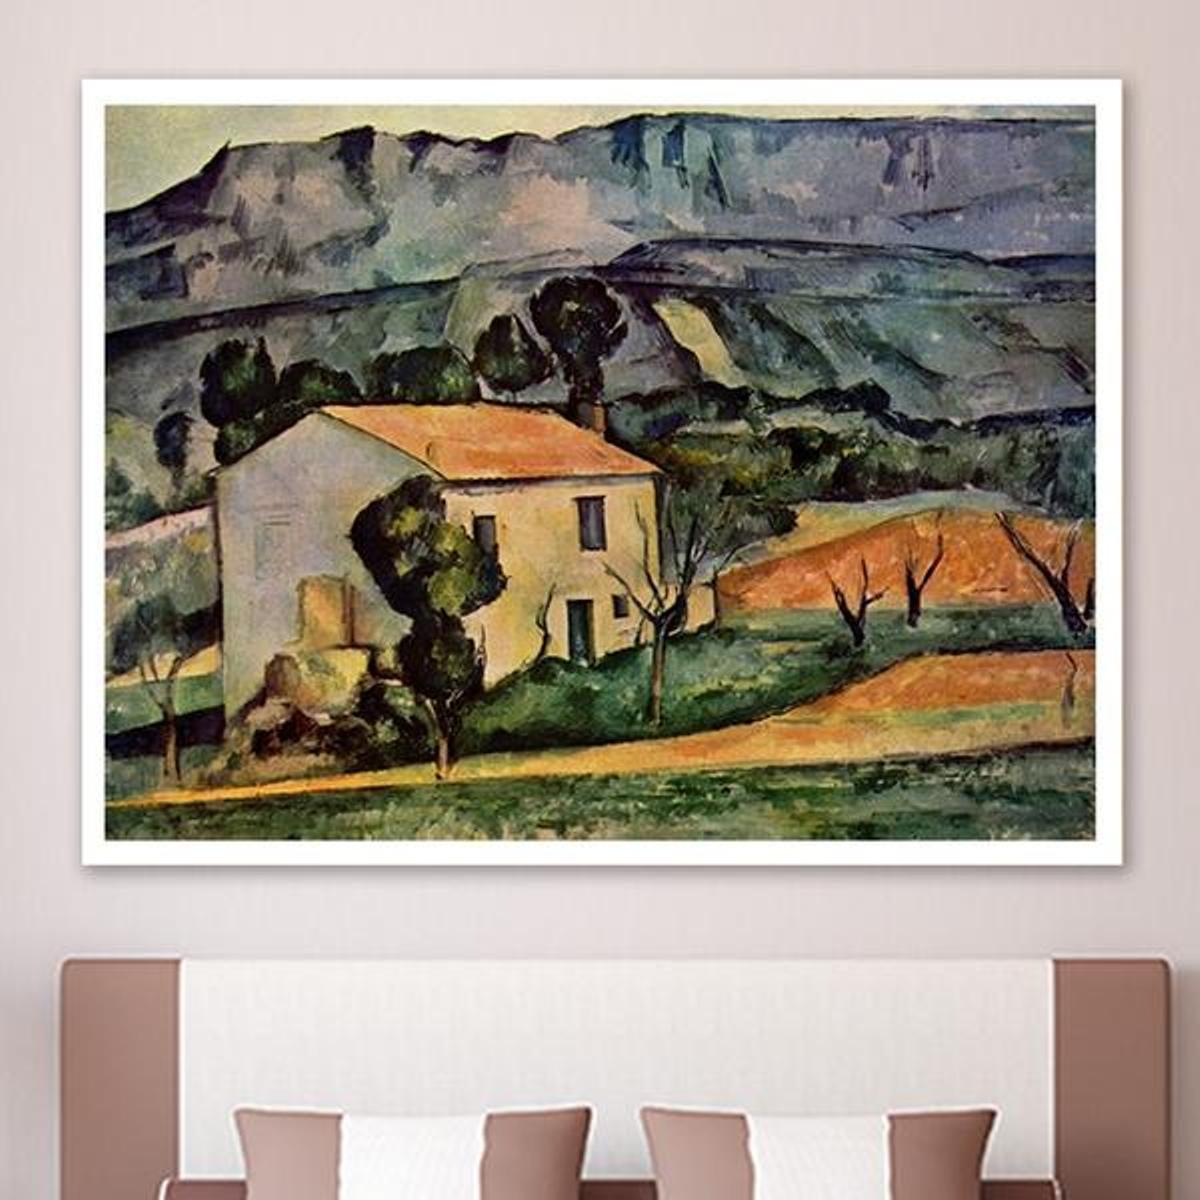 Houses in Provence near Gardanne by Paul Cezanne - Van-Go Paint-By-Number Kit